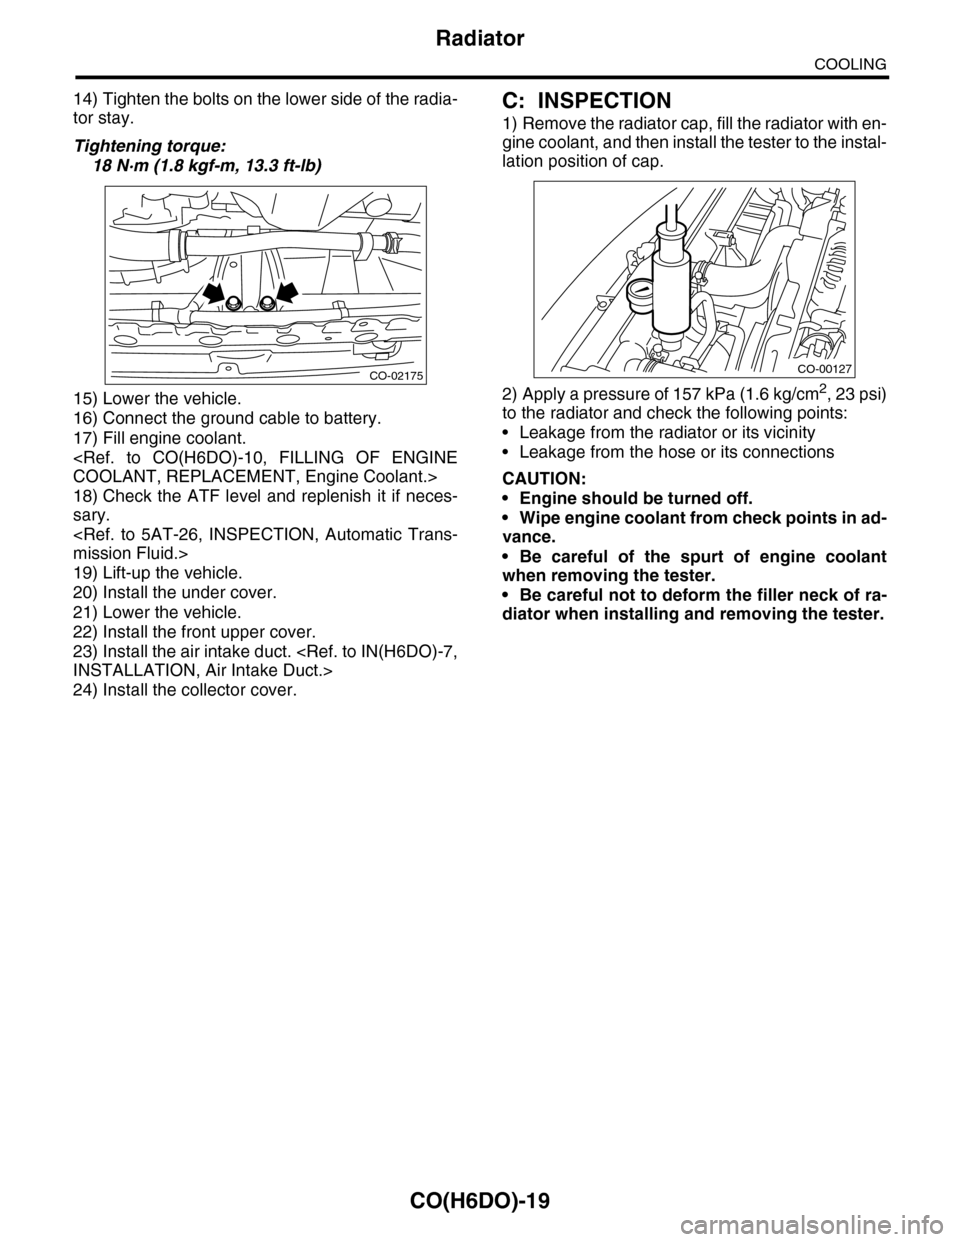 SUBARU TRIBECA 2009 1.G Service Workshop Manual CO(H6DO)-19
Radiator
COOLING
14) Tighten the bolts on the lower side of the radia-
tor stay.
Tightening torque:
18 N·m (1.8 kgf-m, 13.3 ft-lb) 
15) Lower the vehicle.
16) Connect the ground cable to 